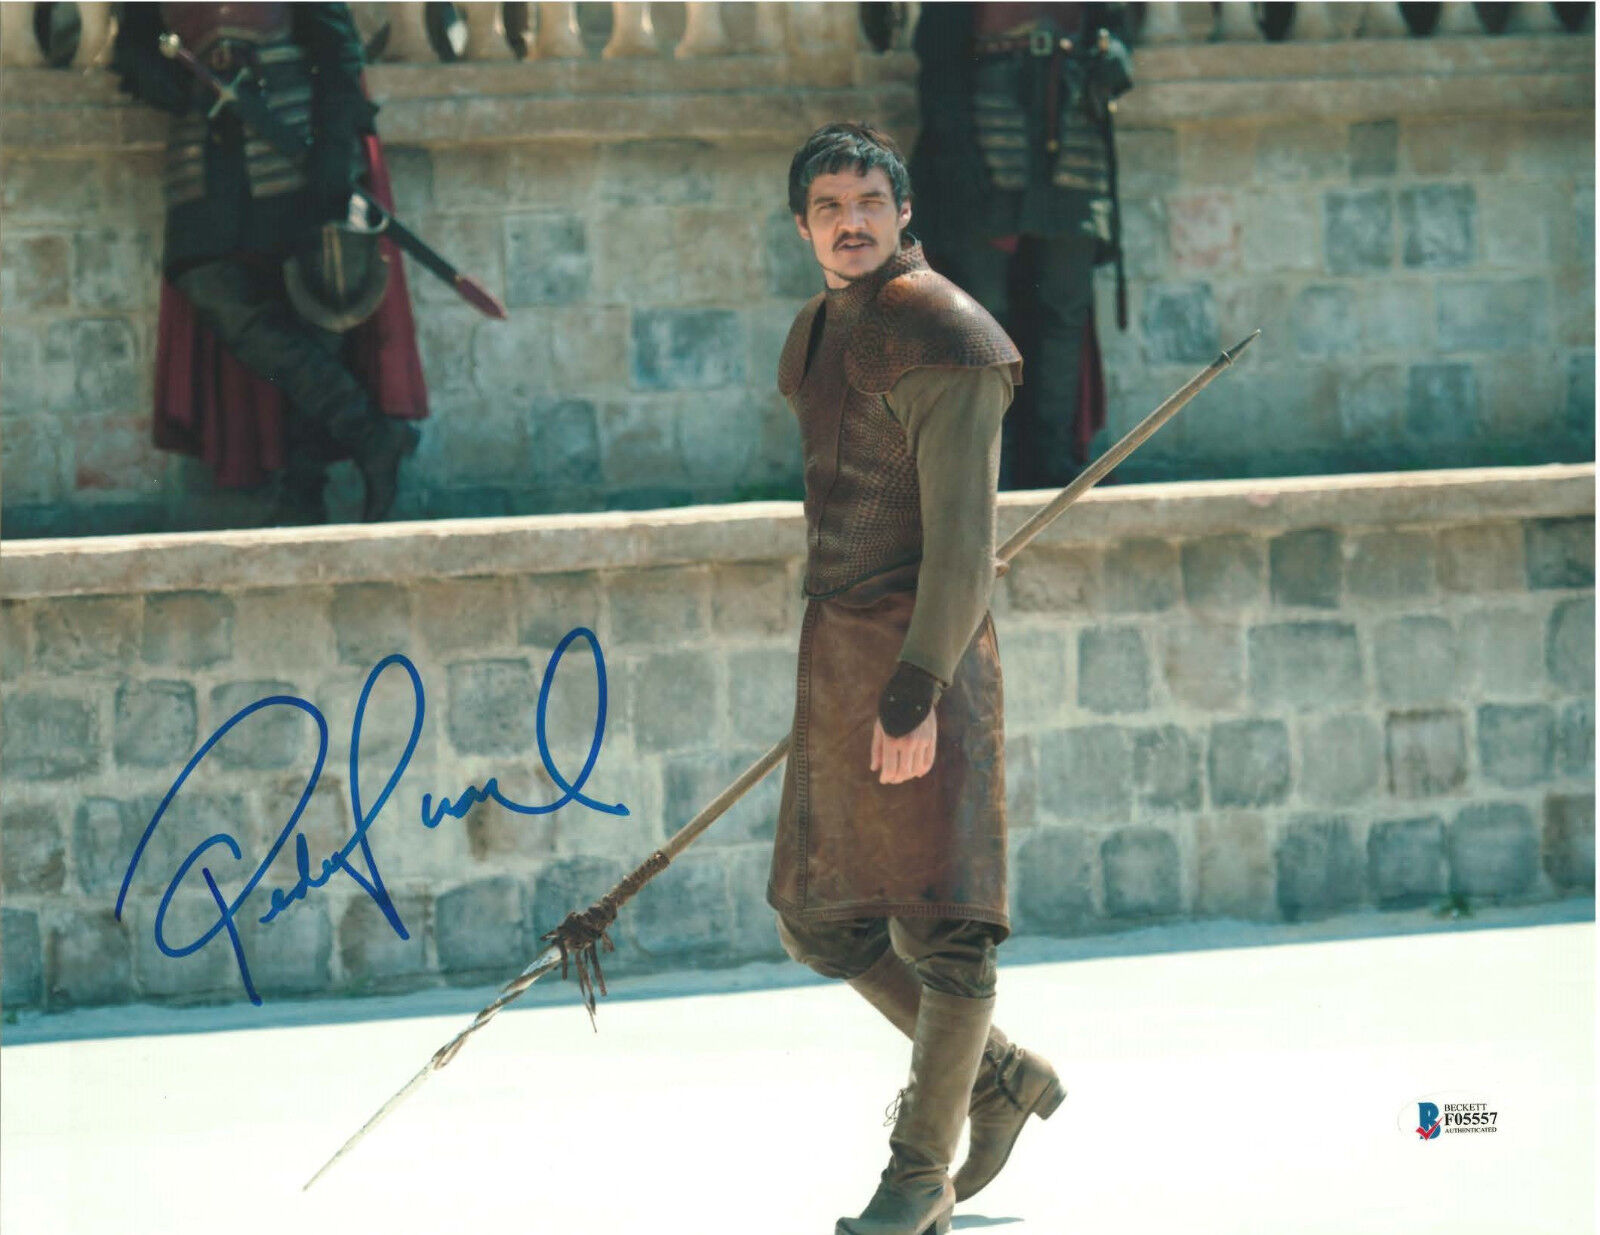 PEDRO PASCAL SIGNED 11X14 PHOTO GAME OF THRONES BECKETT BAS AUTOGRAPH AUTO D